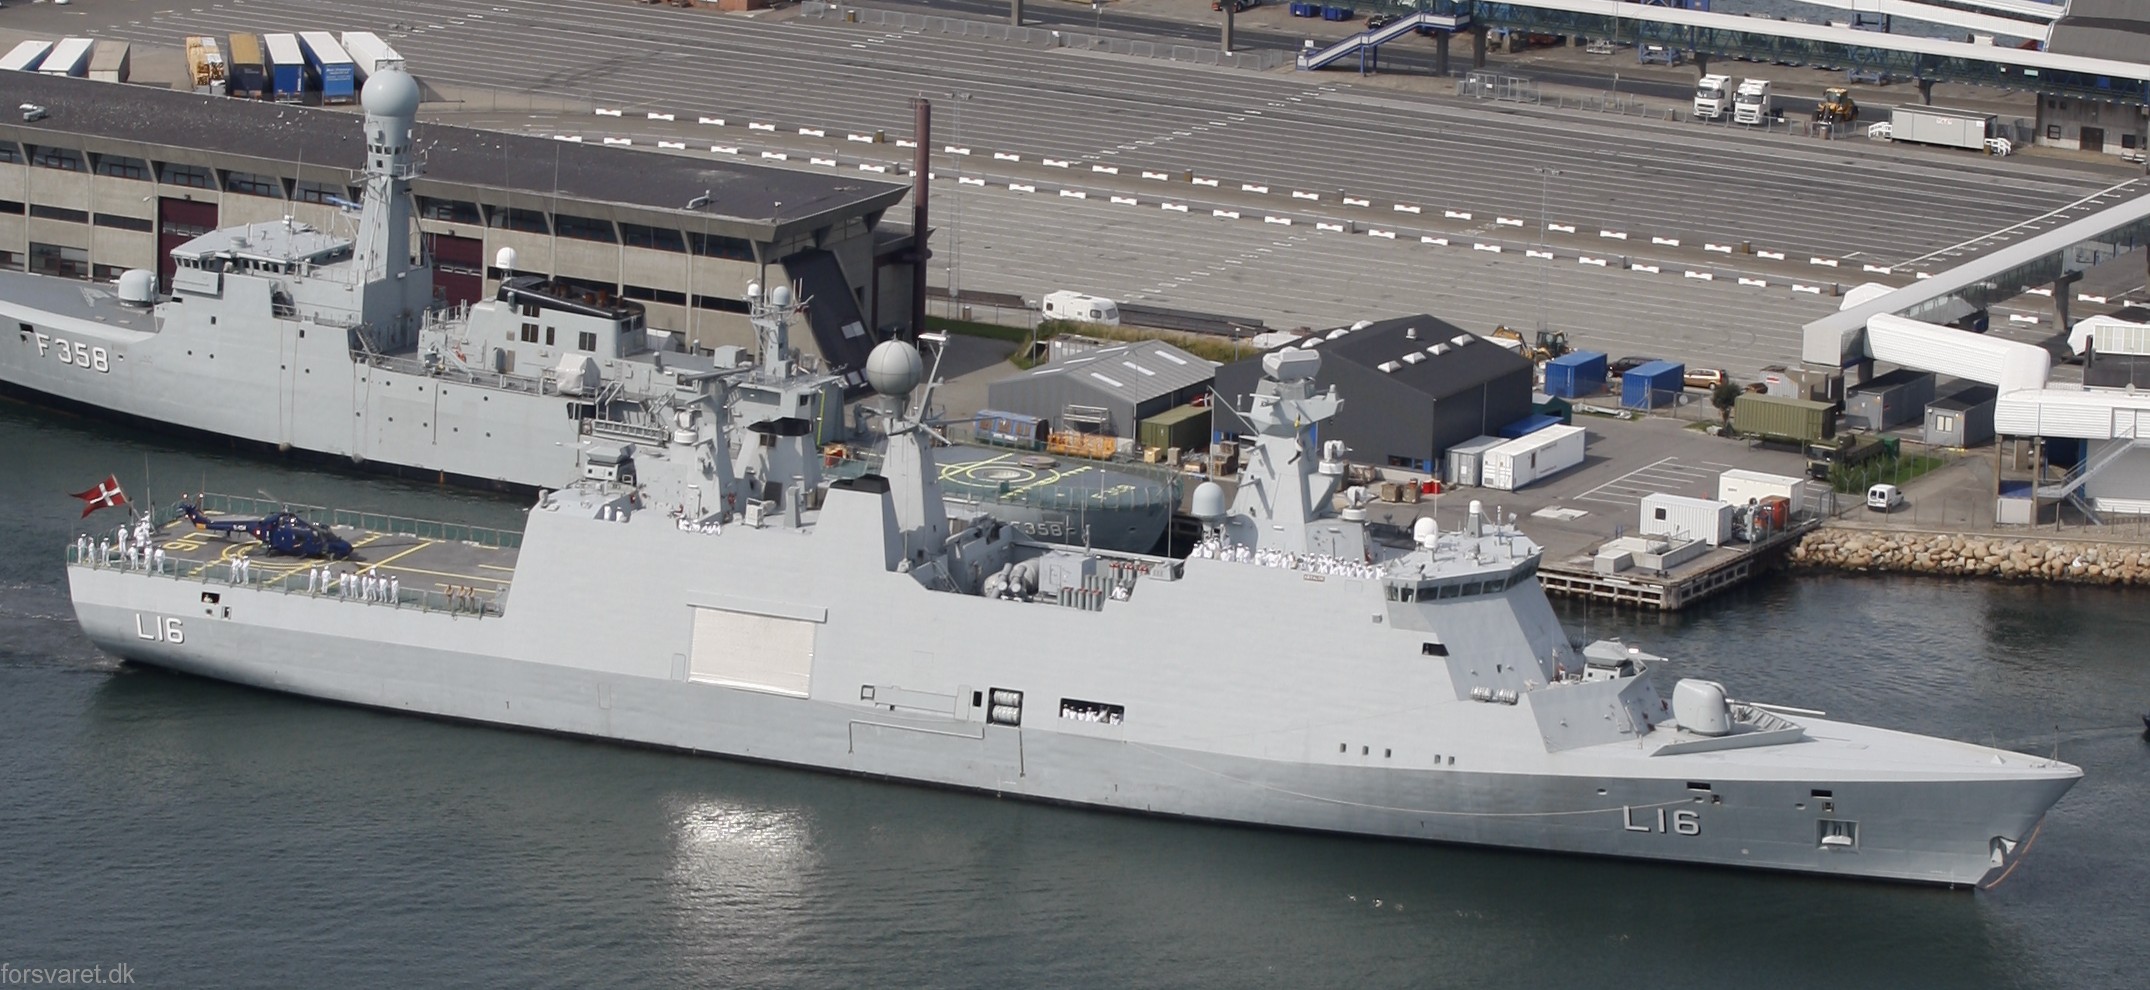 l-16 hdms absalon command support ship frigate royal danish navy 14